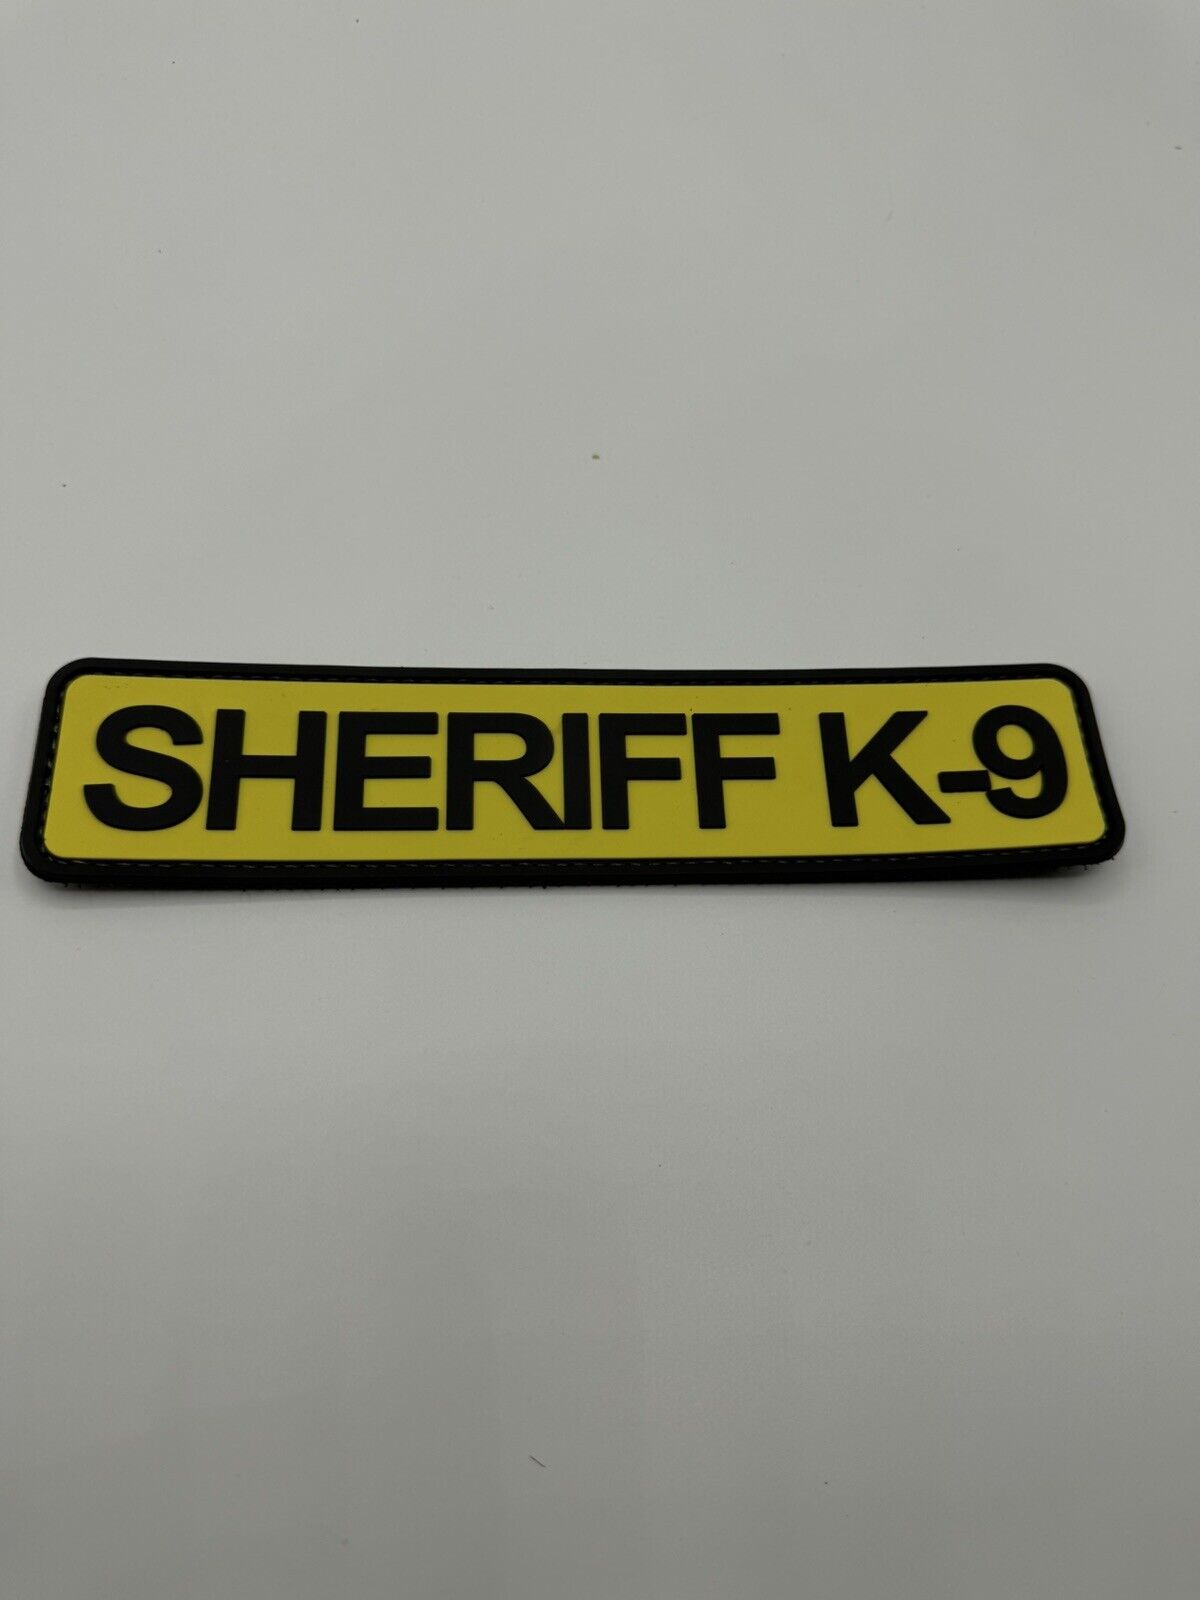 SHERIFF K-9 PATCH LARGE Yellow FOR UNIFORMS, BAGS, HARNESS, KENNEL, HOOK BACK